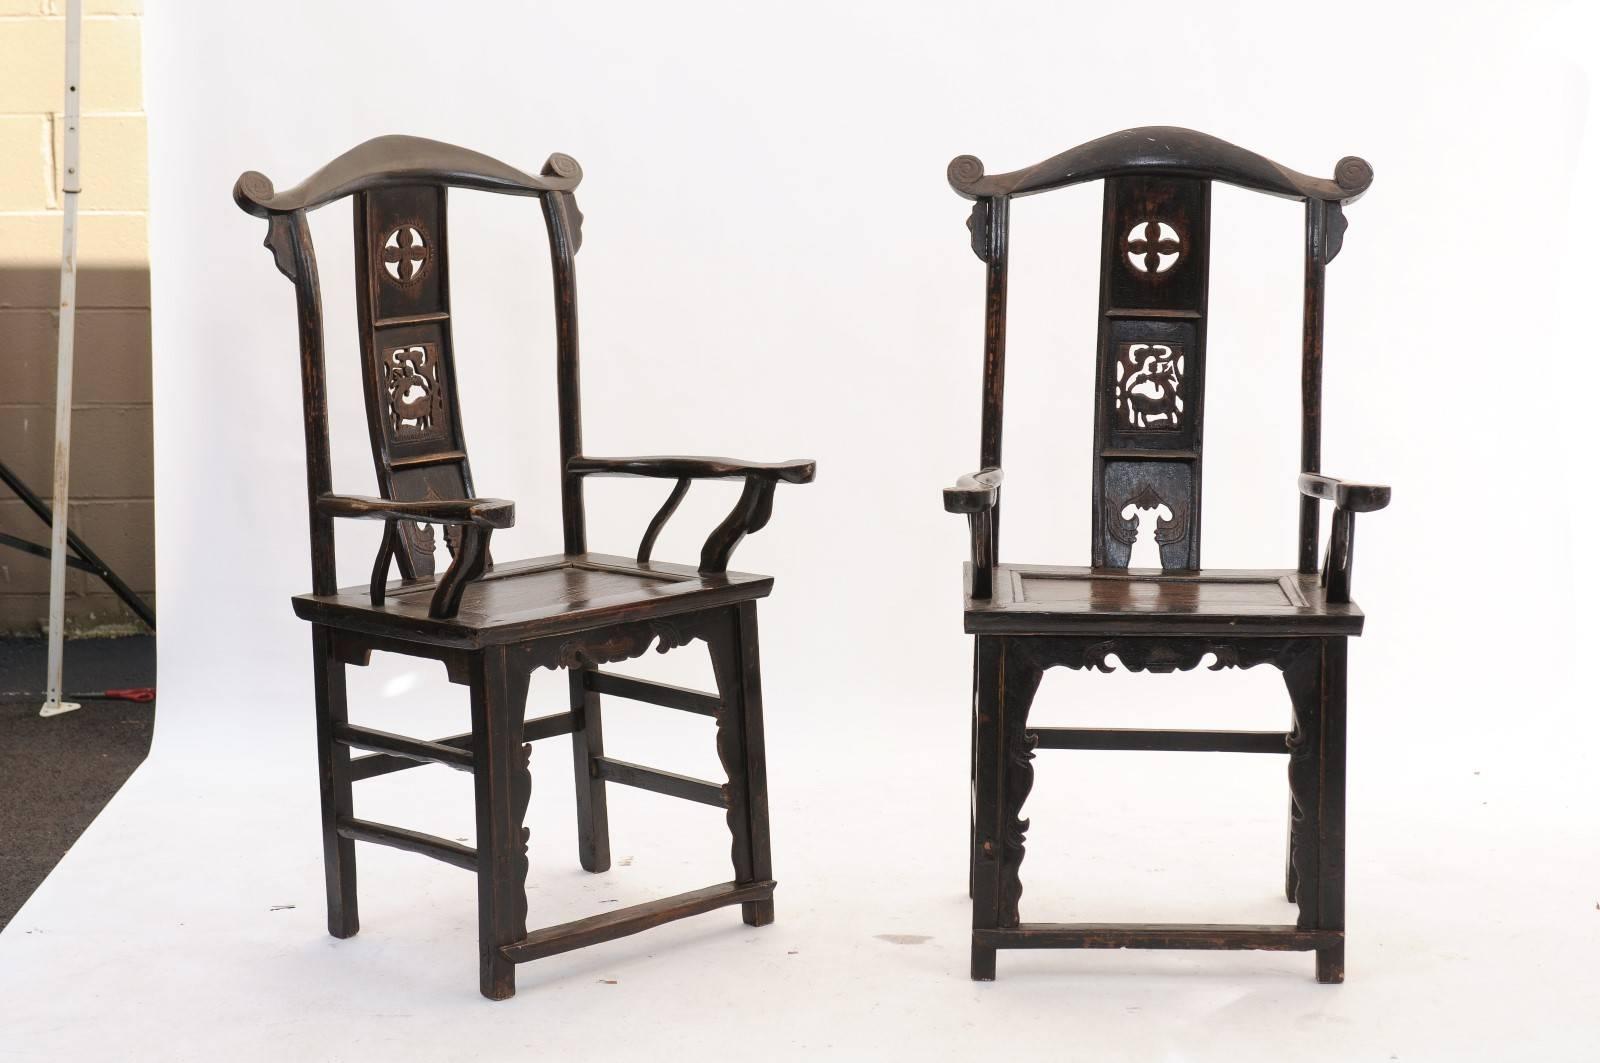 A pair of chinoiserie carved wood armchairs with pierced splats and scrolled arms with dark wood finish from the 1890s. Because we are not experts in chinoiserie style chairs, we can’t vouch for the origins of this pretty pair. What we can tell you